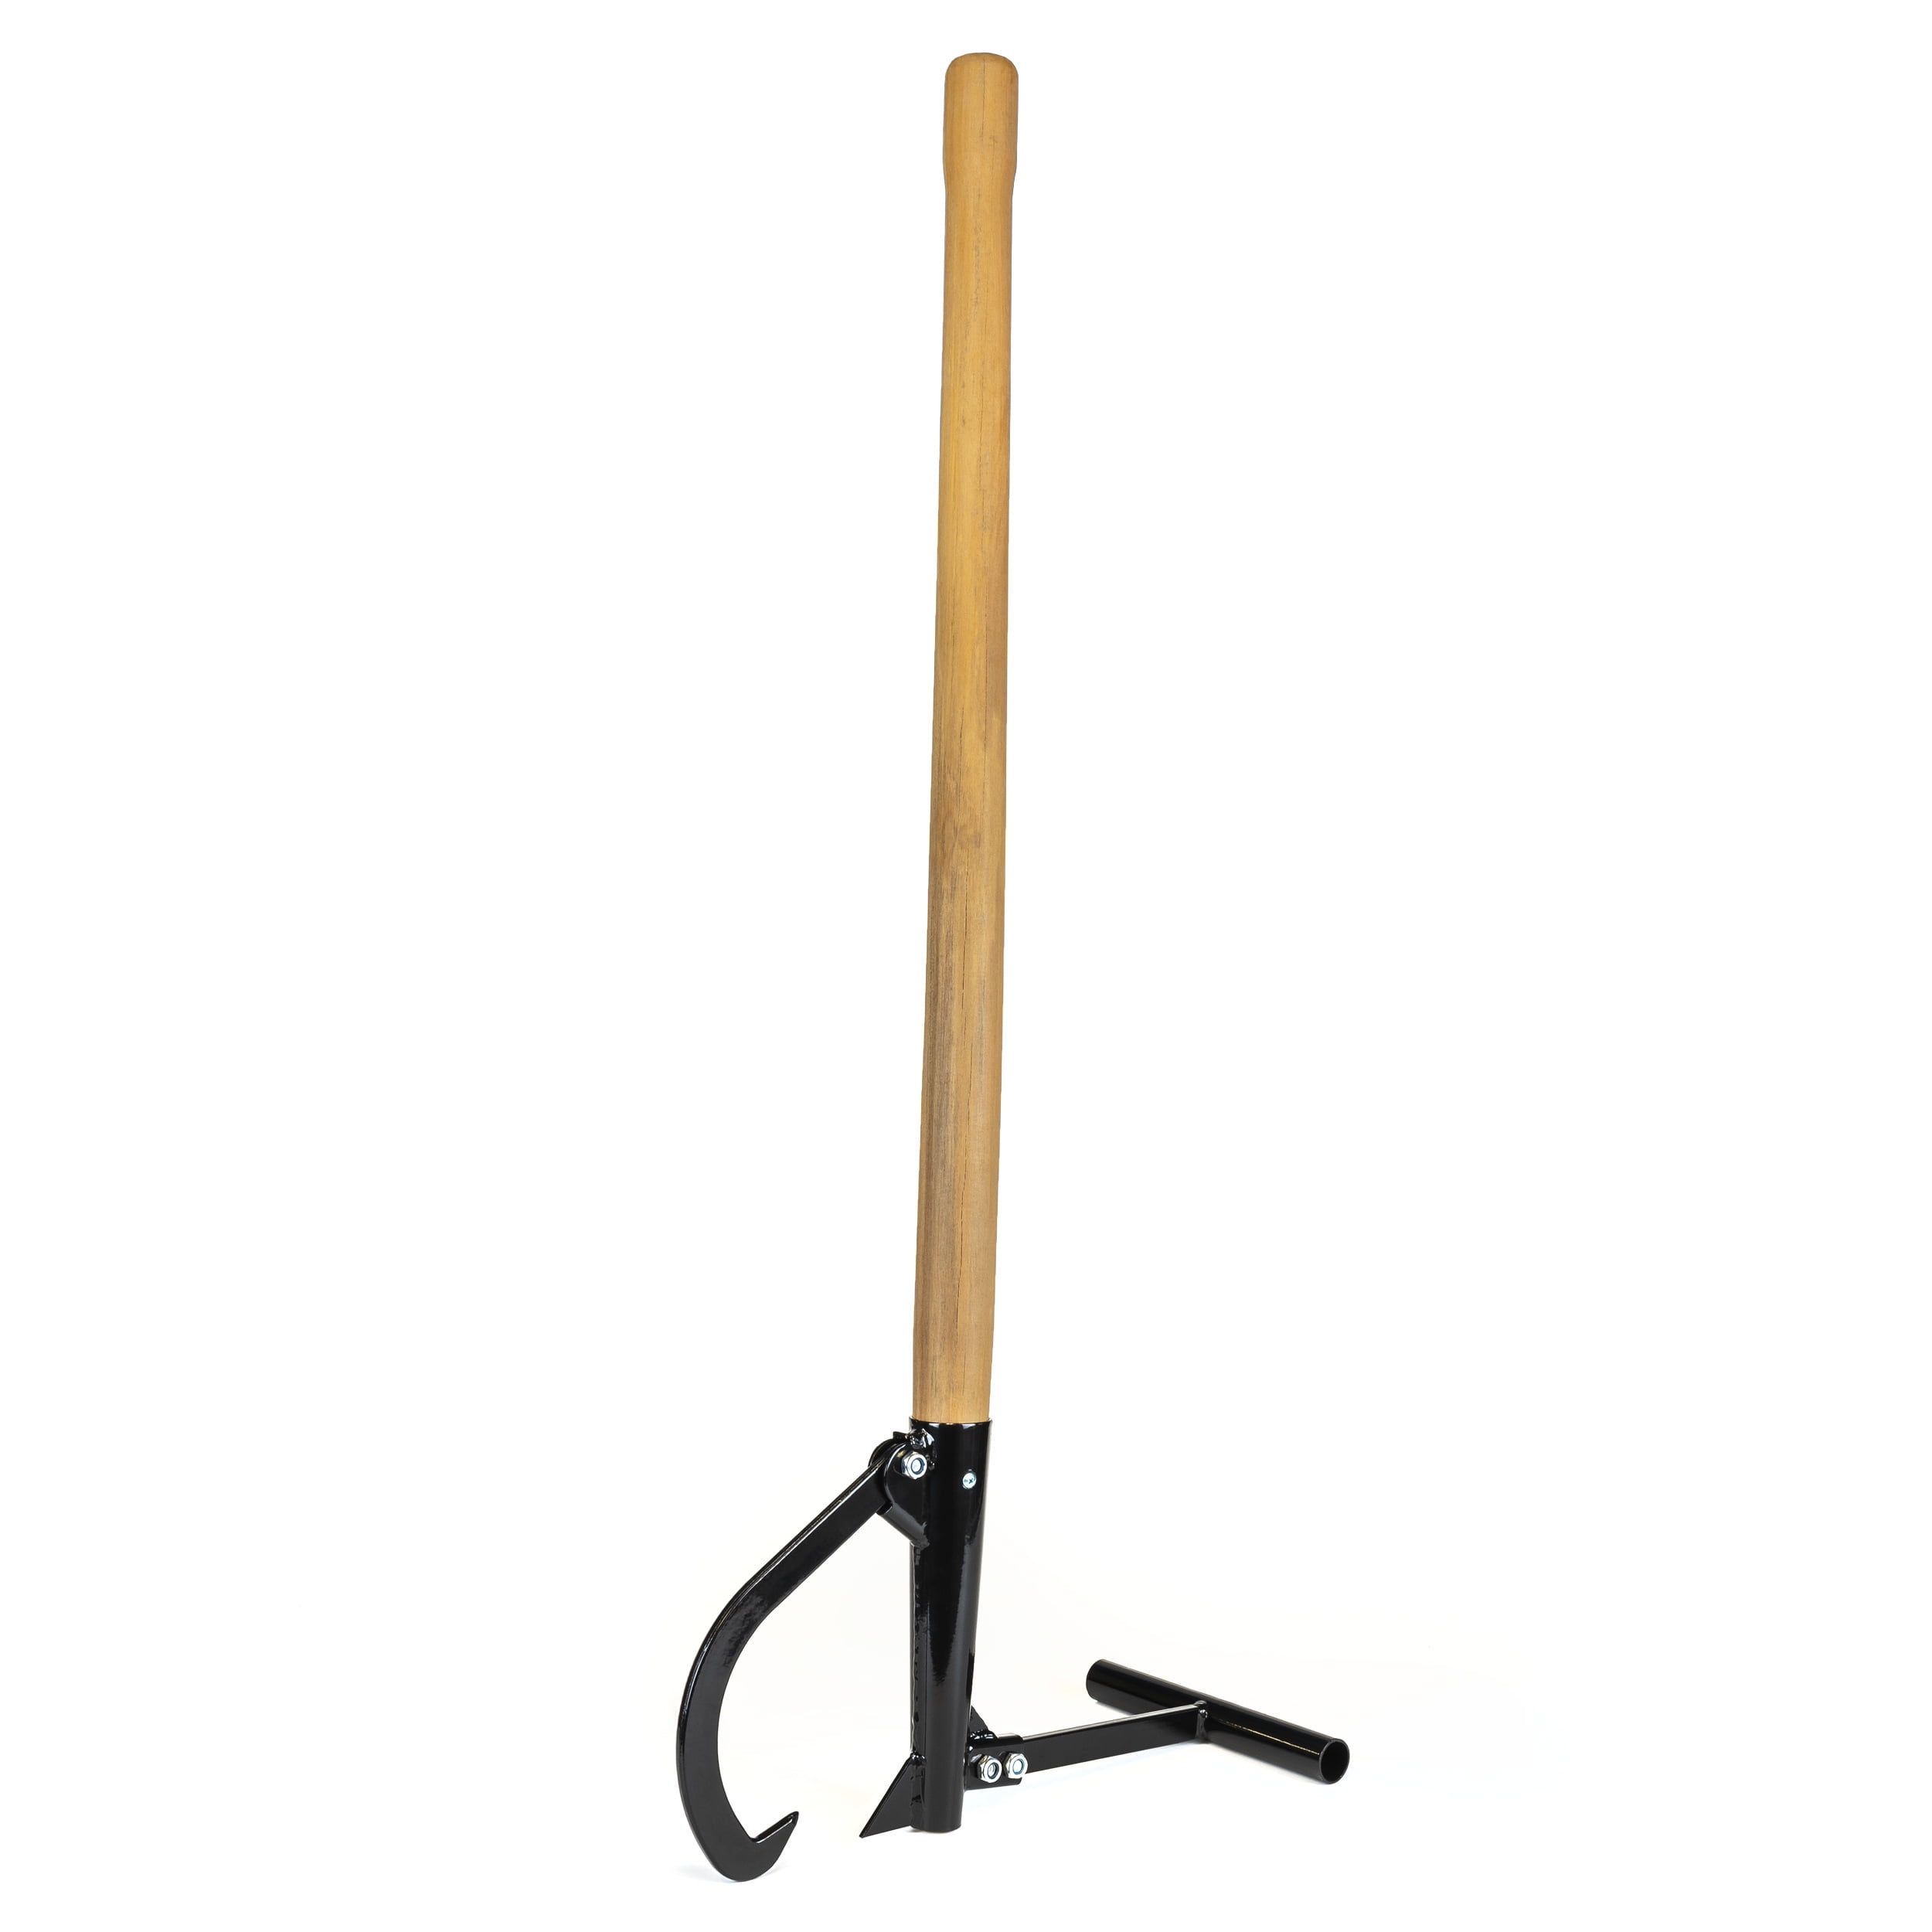 47 Inch Detachable Peavey Cant Hook W/ Handling Logs Lifting Reliable Robust 